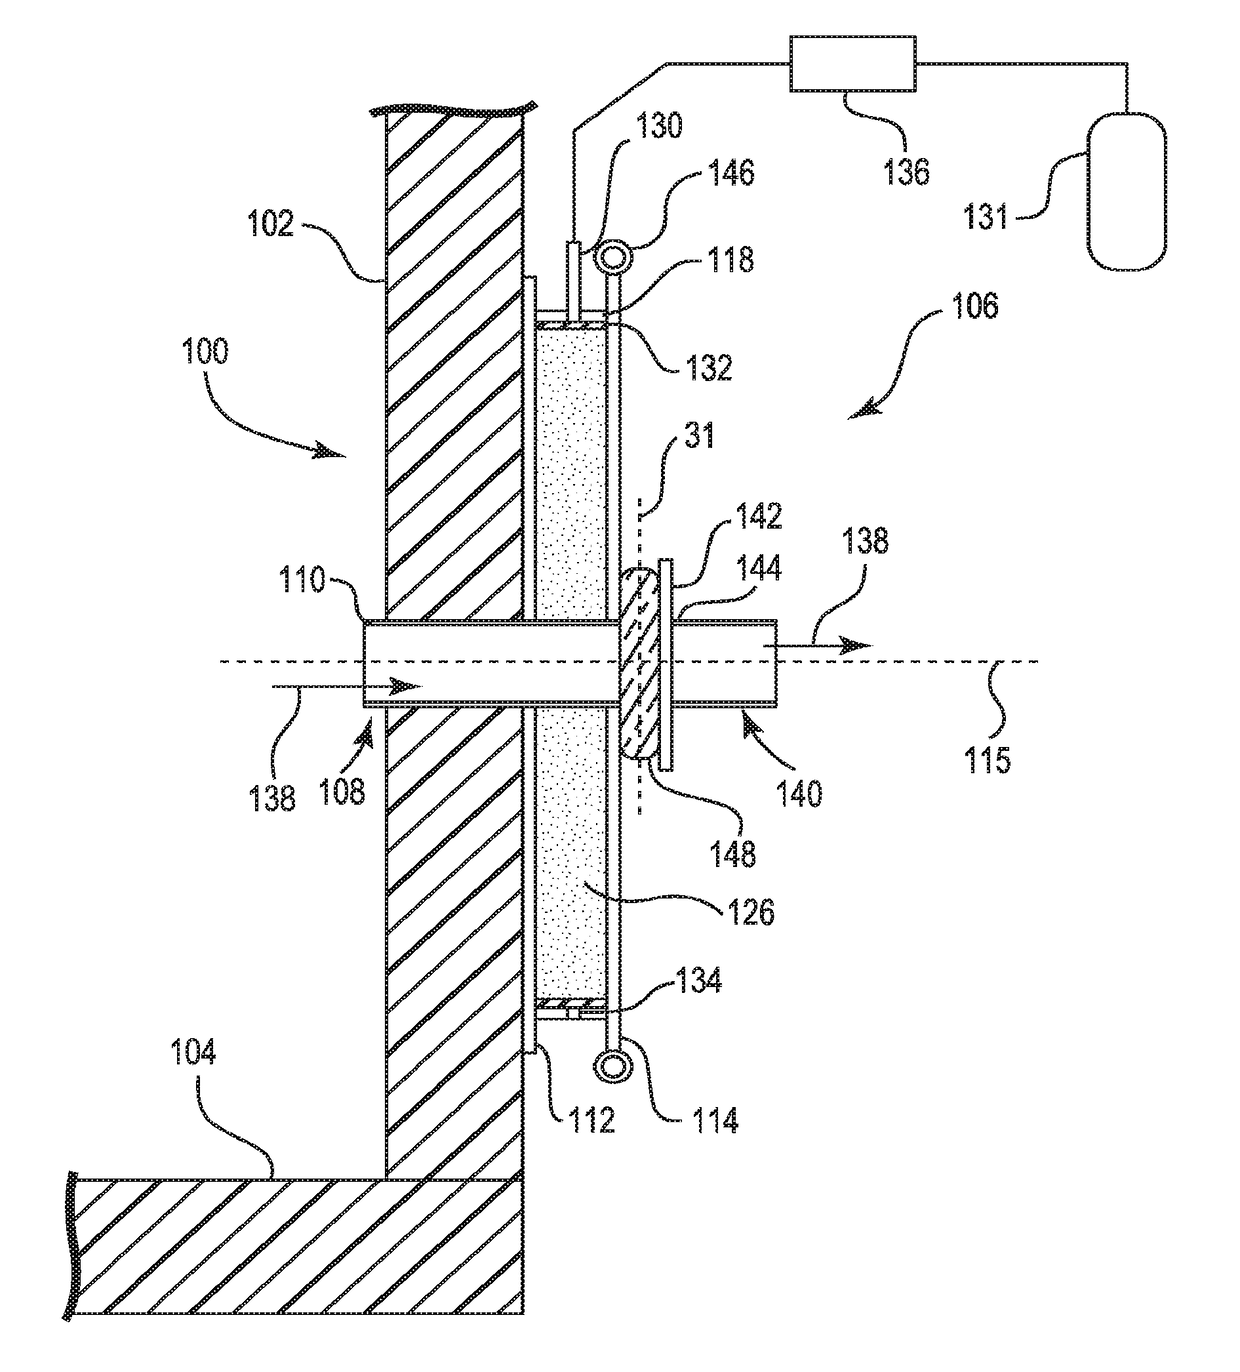 Apparatus and method for conditioning molten glass